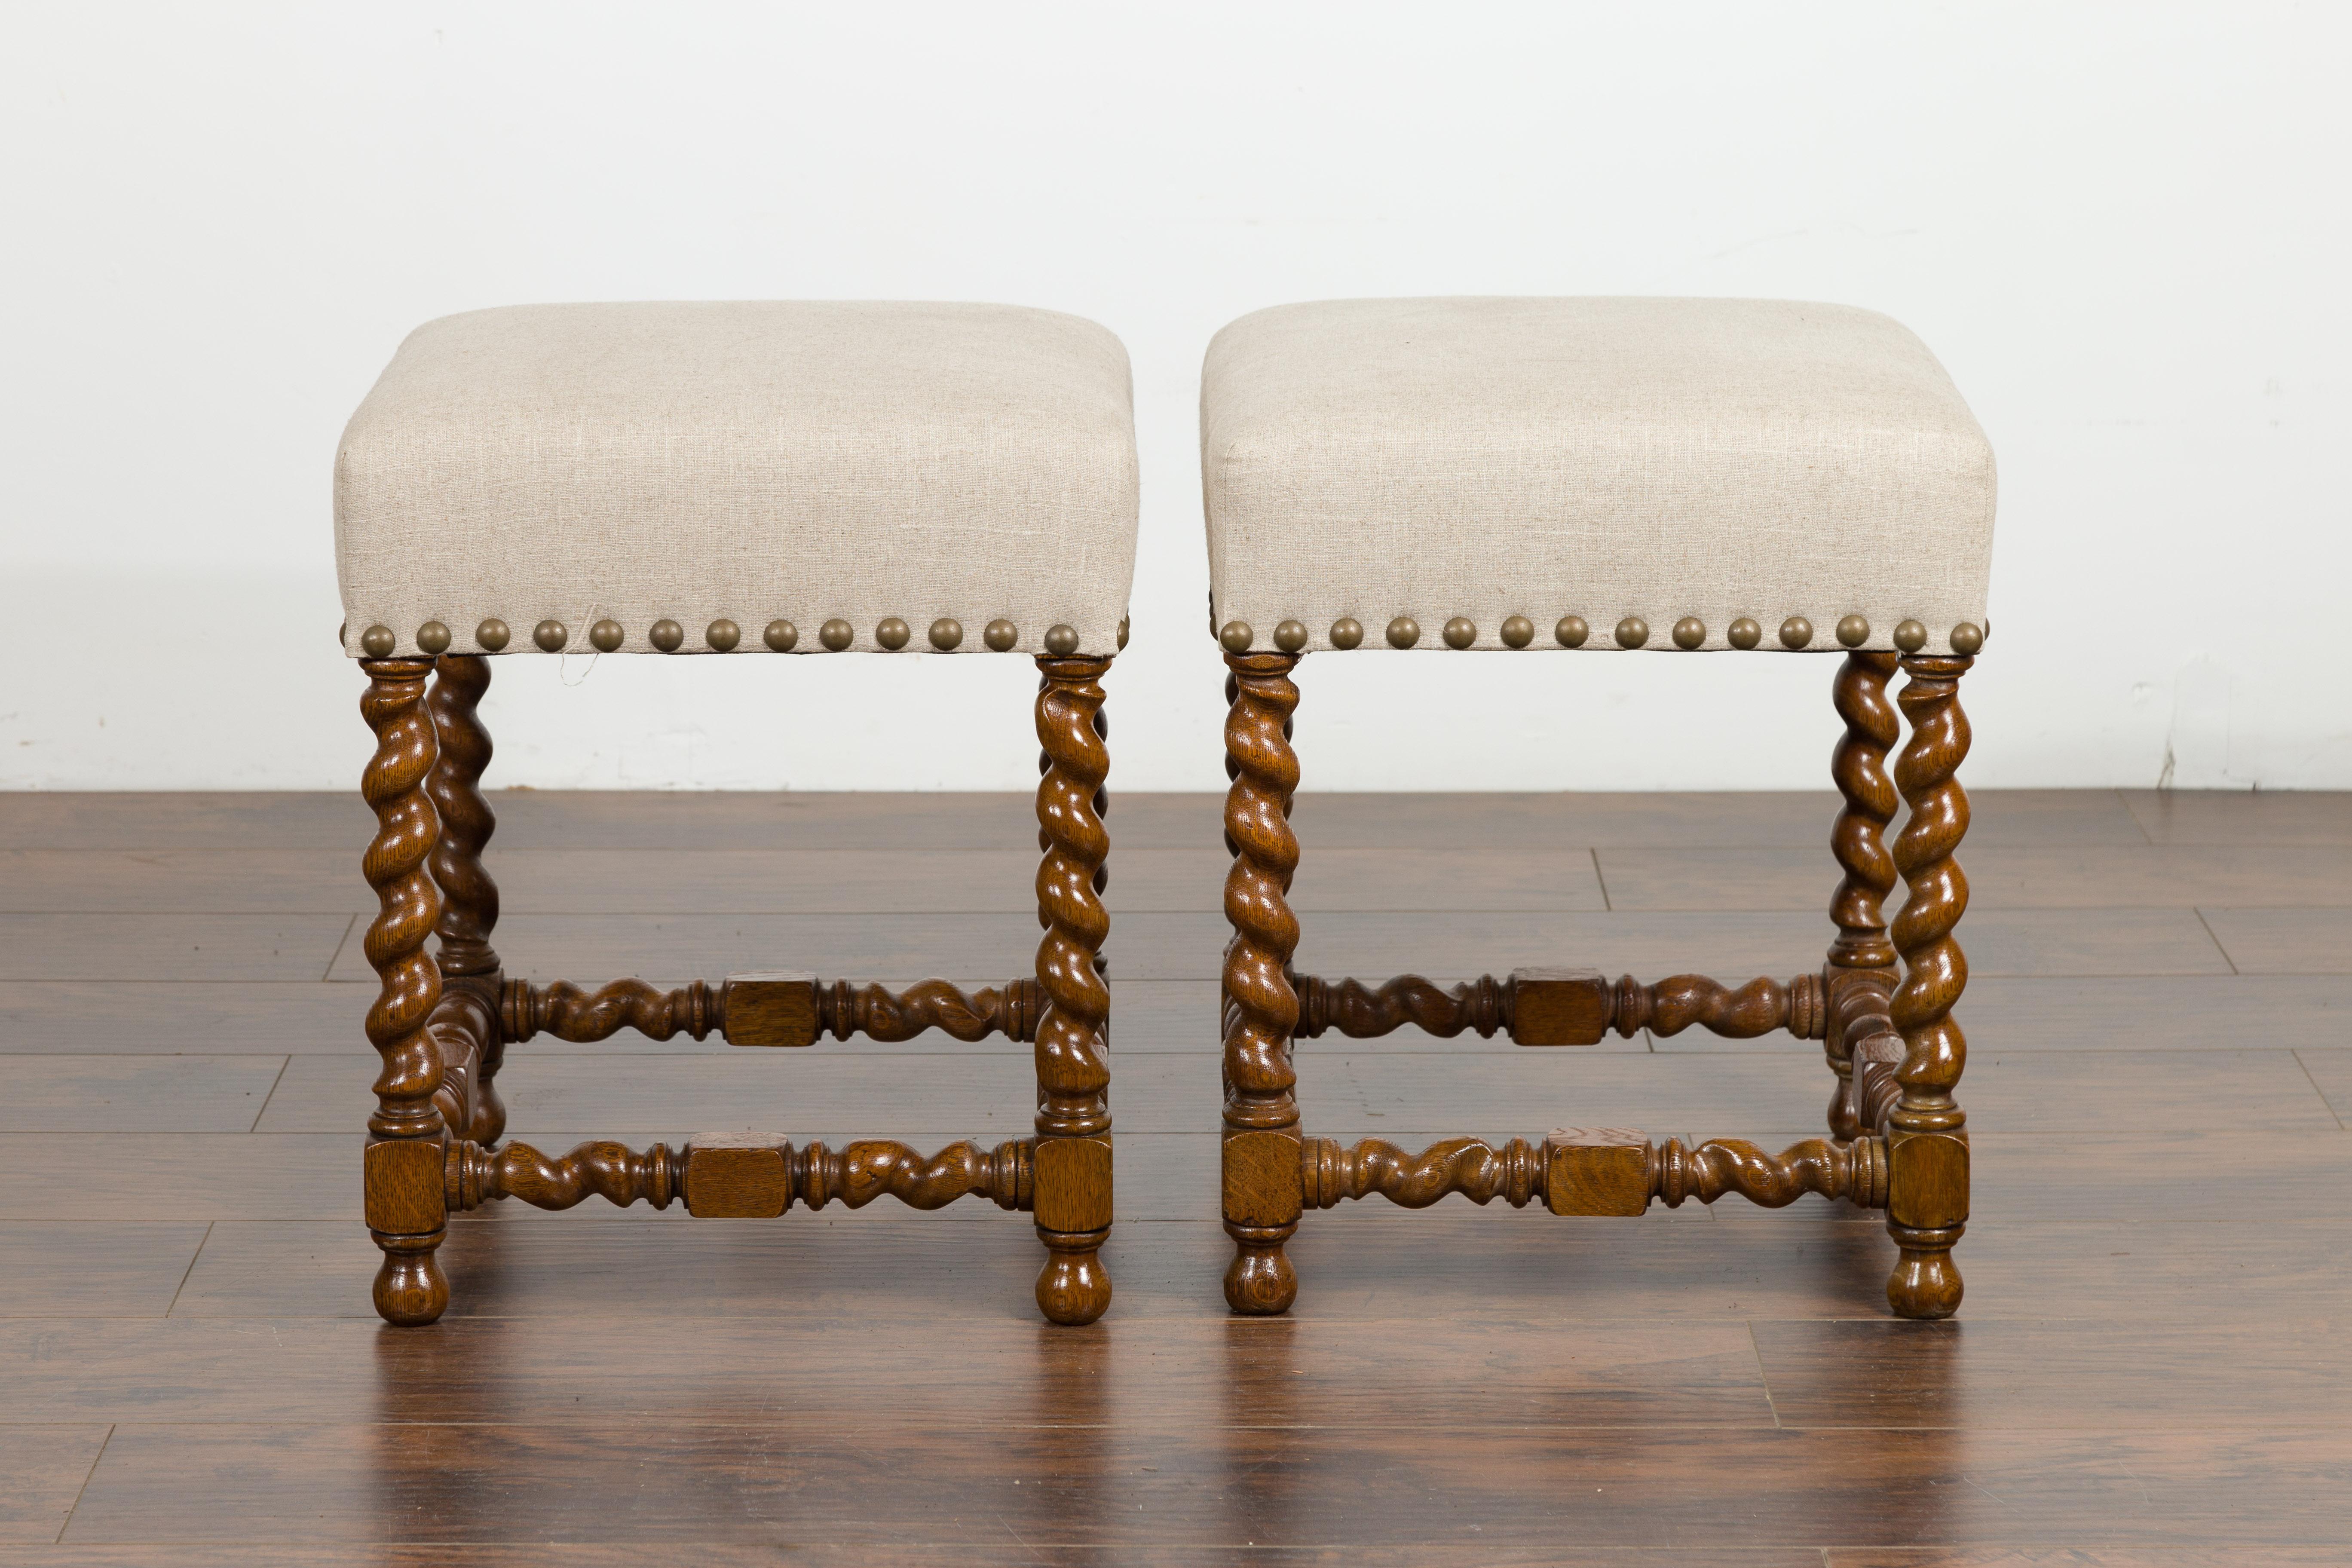 A pair of English oak barley twist stools from the late 19th century, with new upholstery. Created in England during the last quarter of the 19th century, each of this pair of stools features a square top newly recovered with a neutral-toned linen